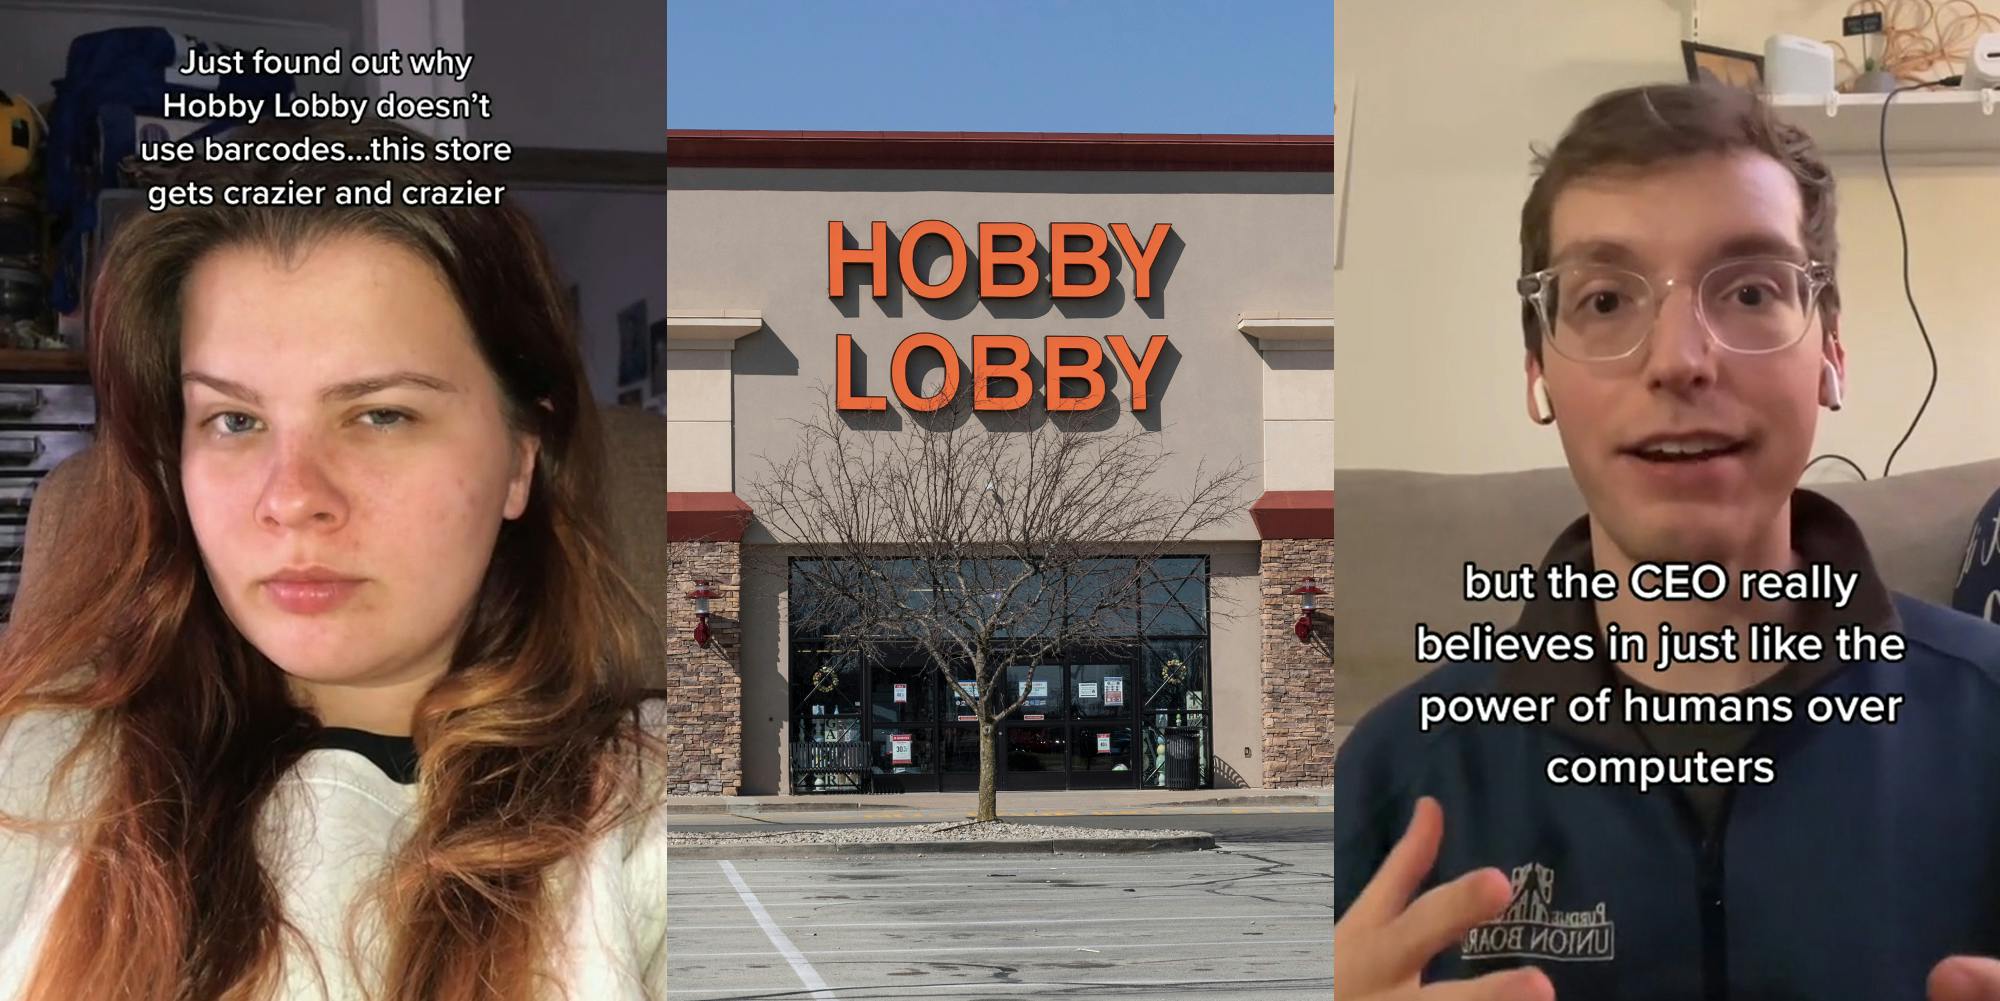 woman with caption "Just found out Hobby Lobby doesn't use barcodes... this store gets crazier and crazier" (l) Hobby Lobby sign on building (c) former Hobby Lobby employee speaking with caption "but the CEO really believes in just like the power of humans over computers" (r)